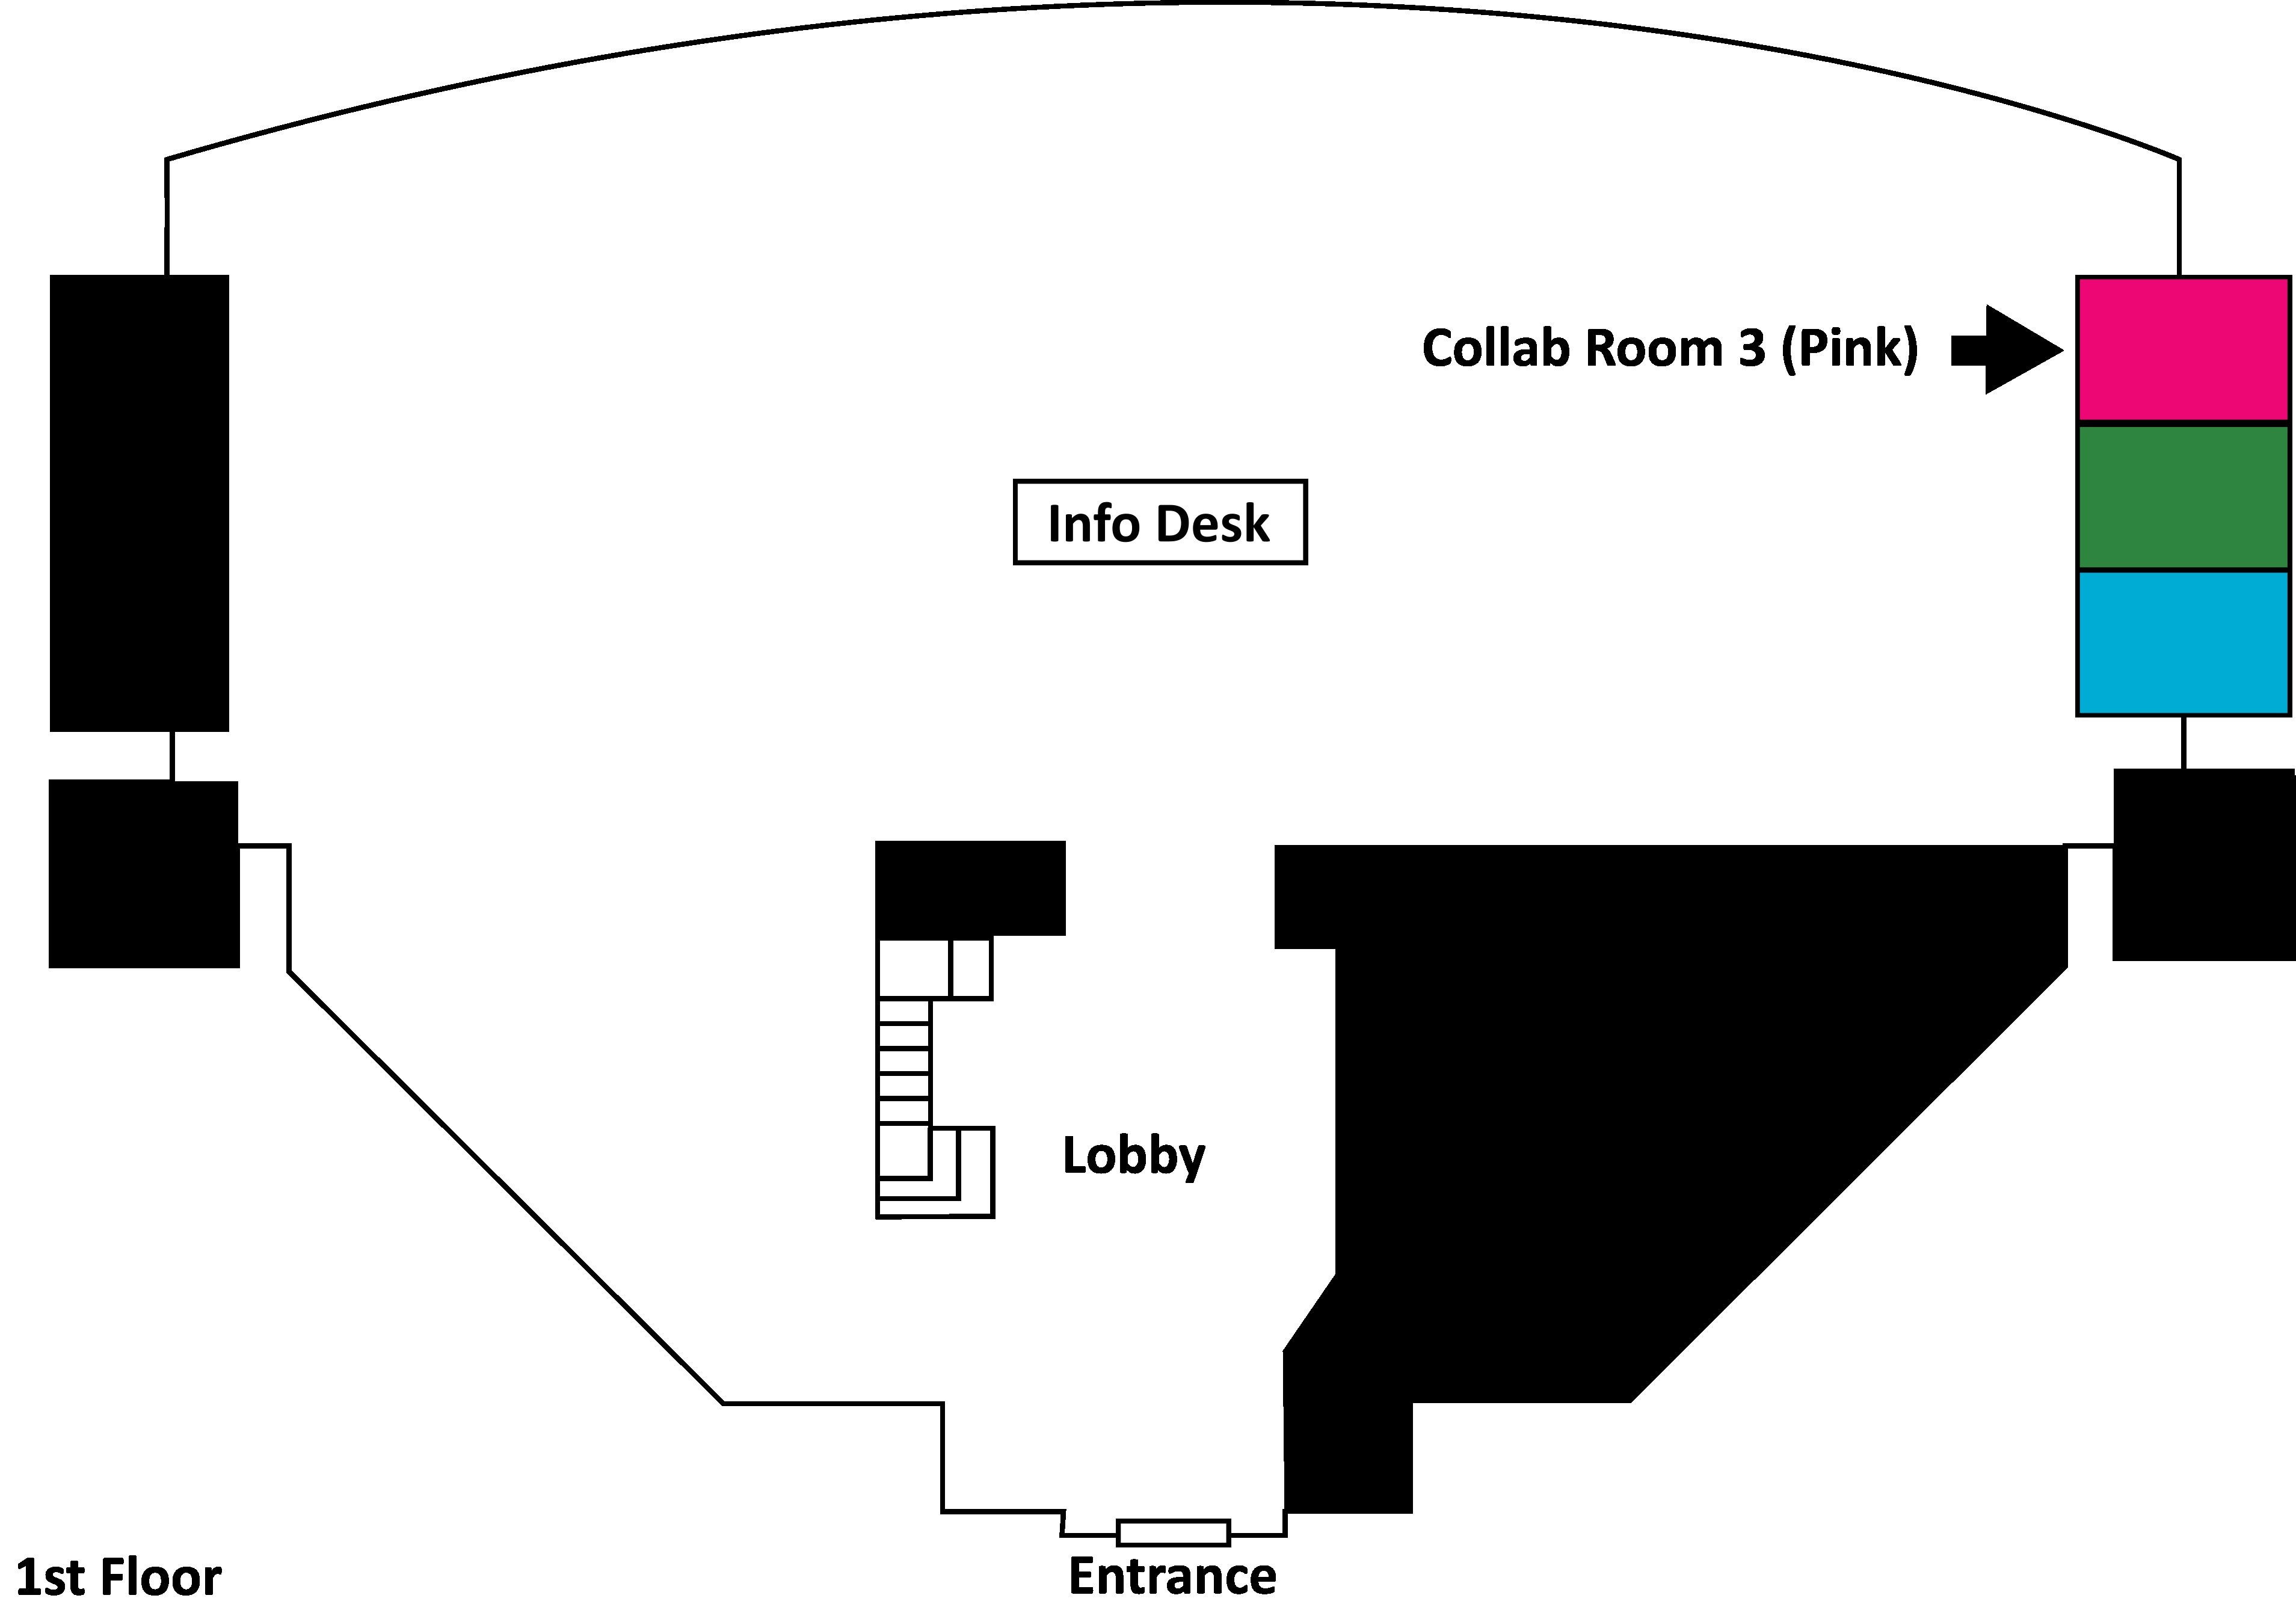 A map of the first floor of the library. There is an arrow pointing to a pink room on the left side of the library. There is a green and blue room below the pink room.